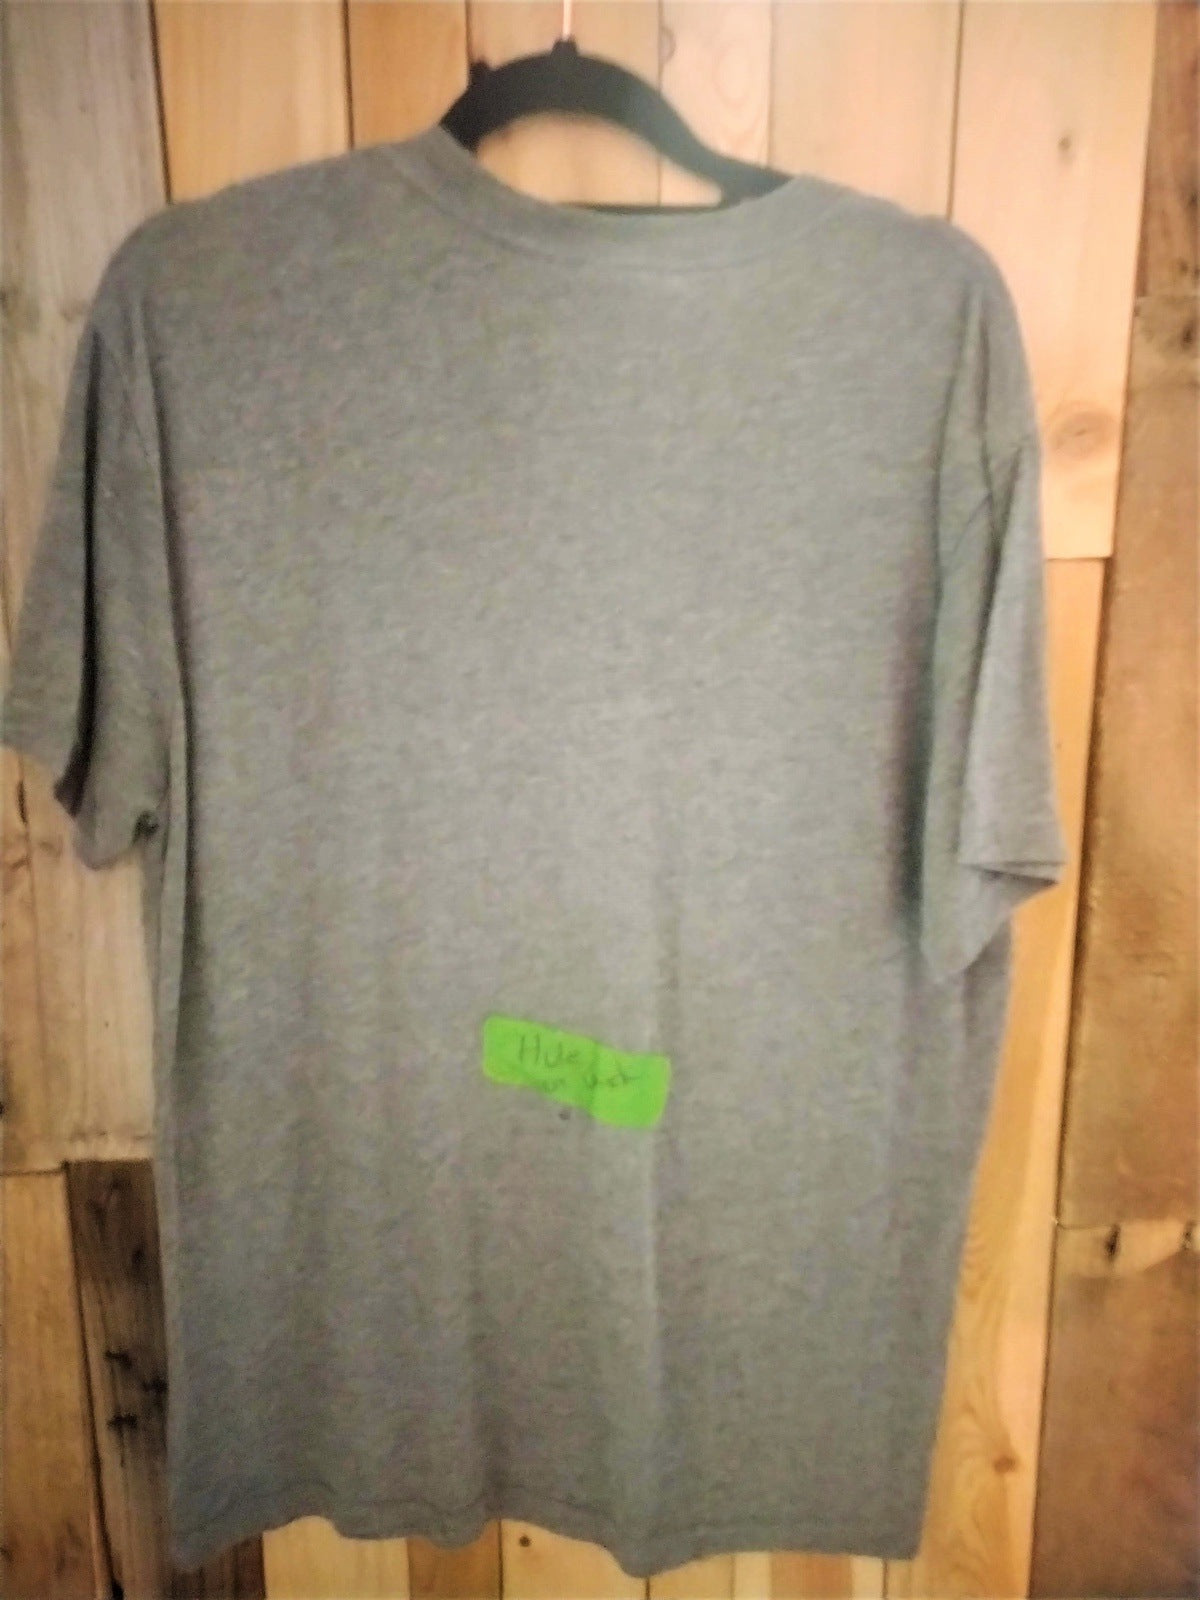 Fender Official Merchandise T Shirt Size Medium- As Is- Hole on back